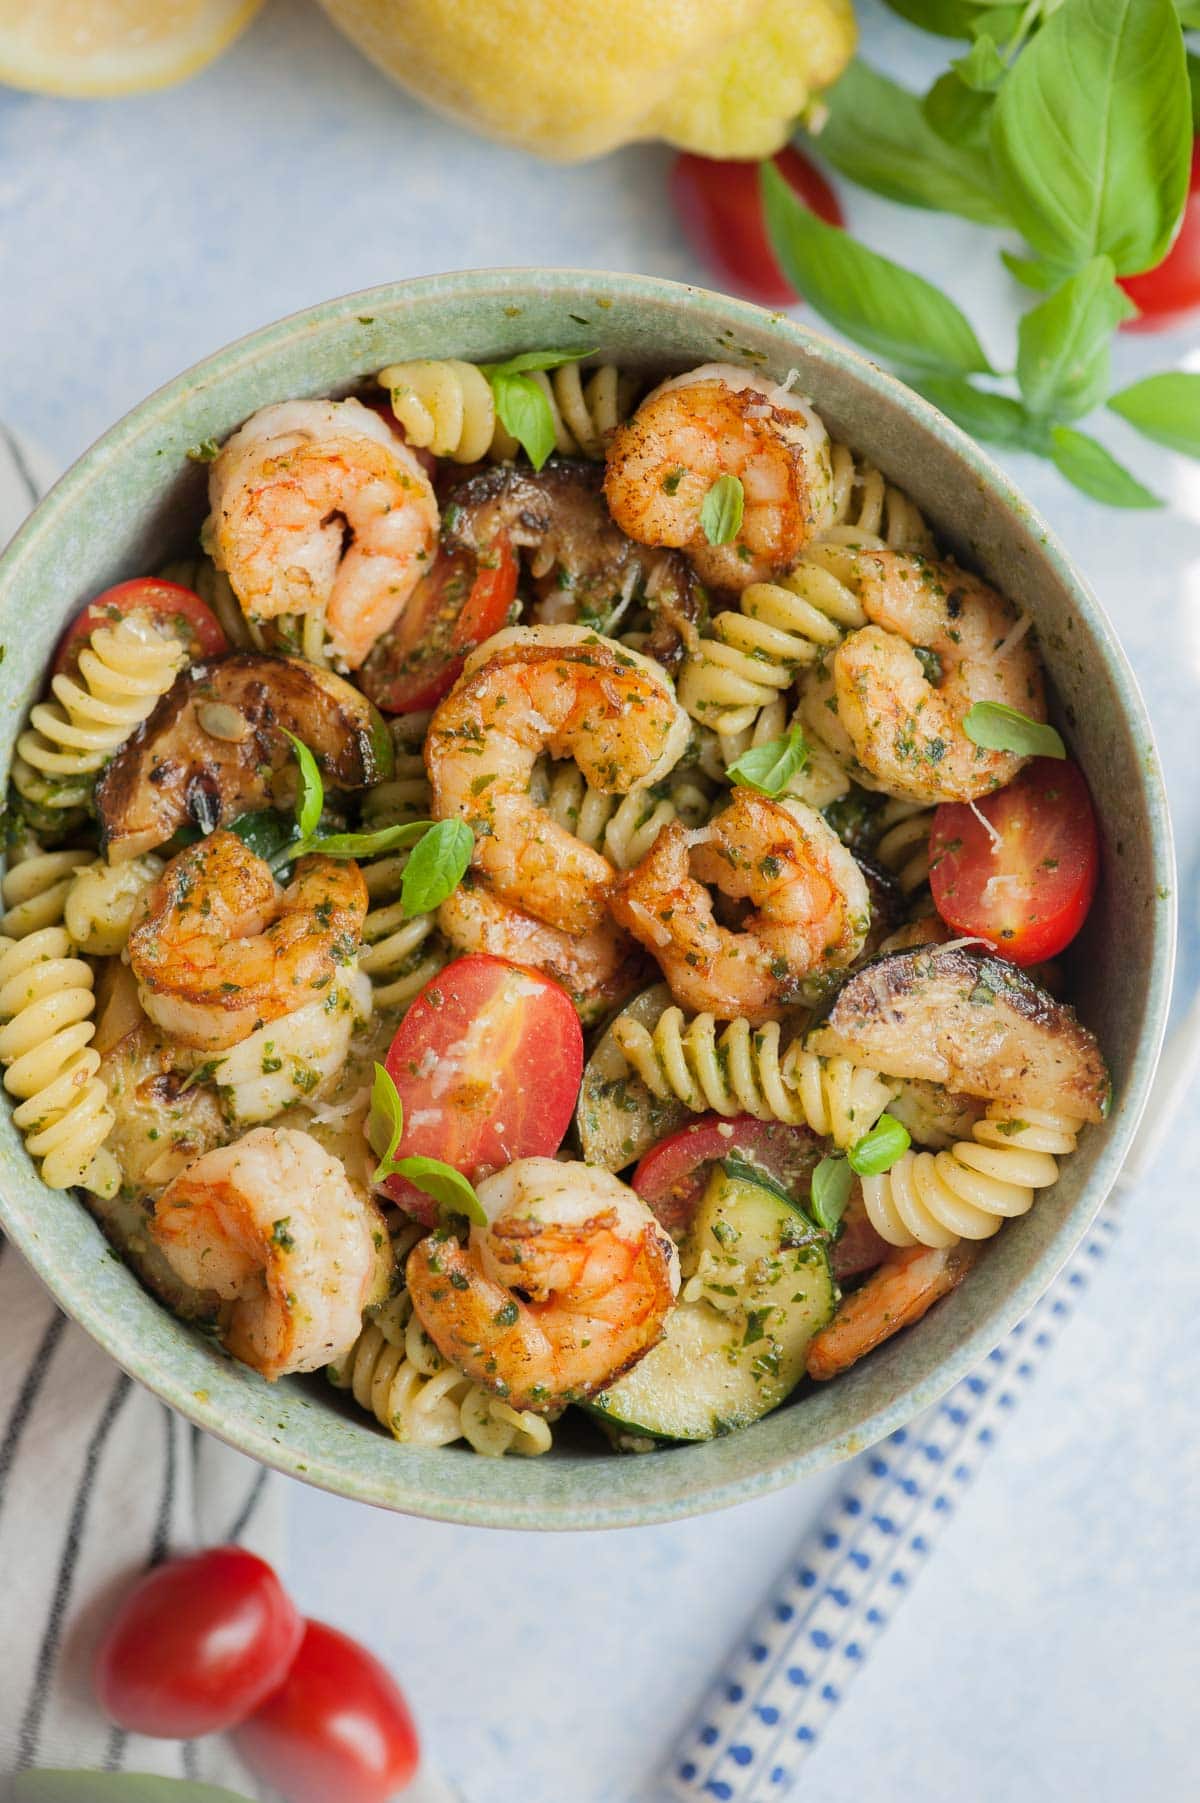 Shrimp pesto pasta in a green bowl. Basil leaves, lemons and tomatoes in the background.